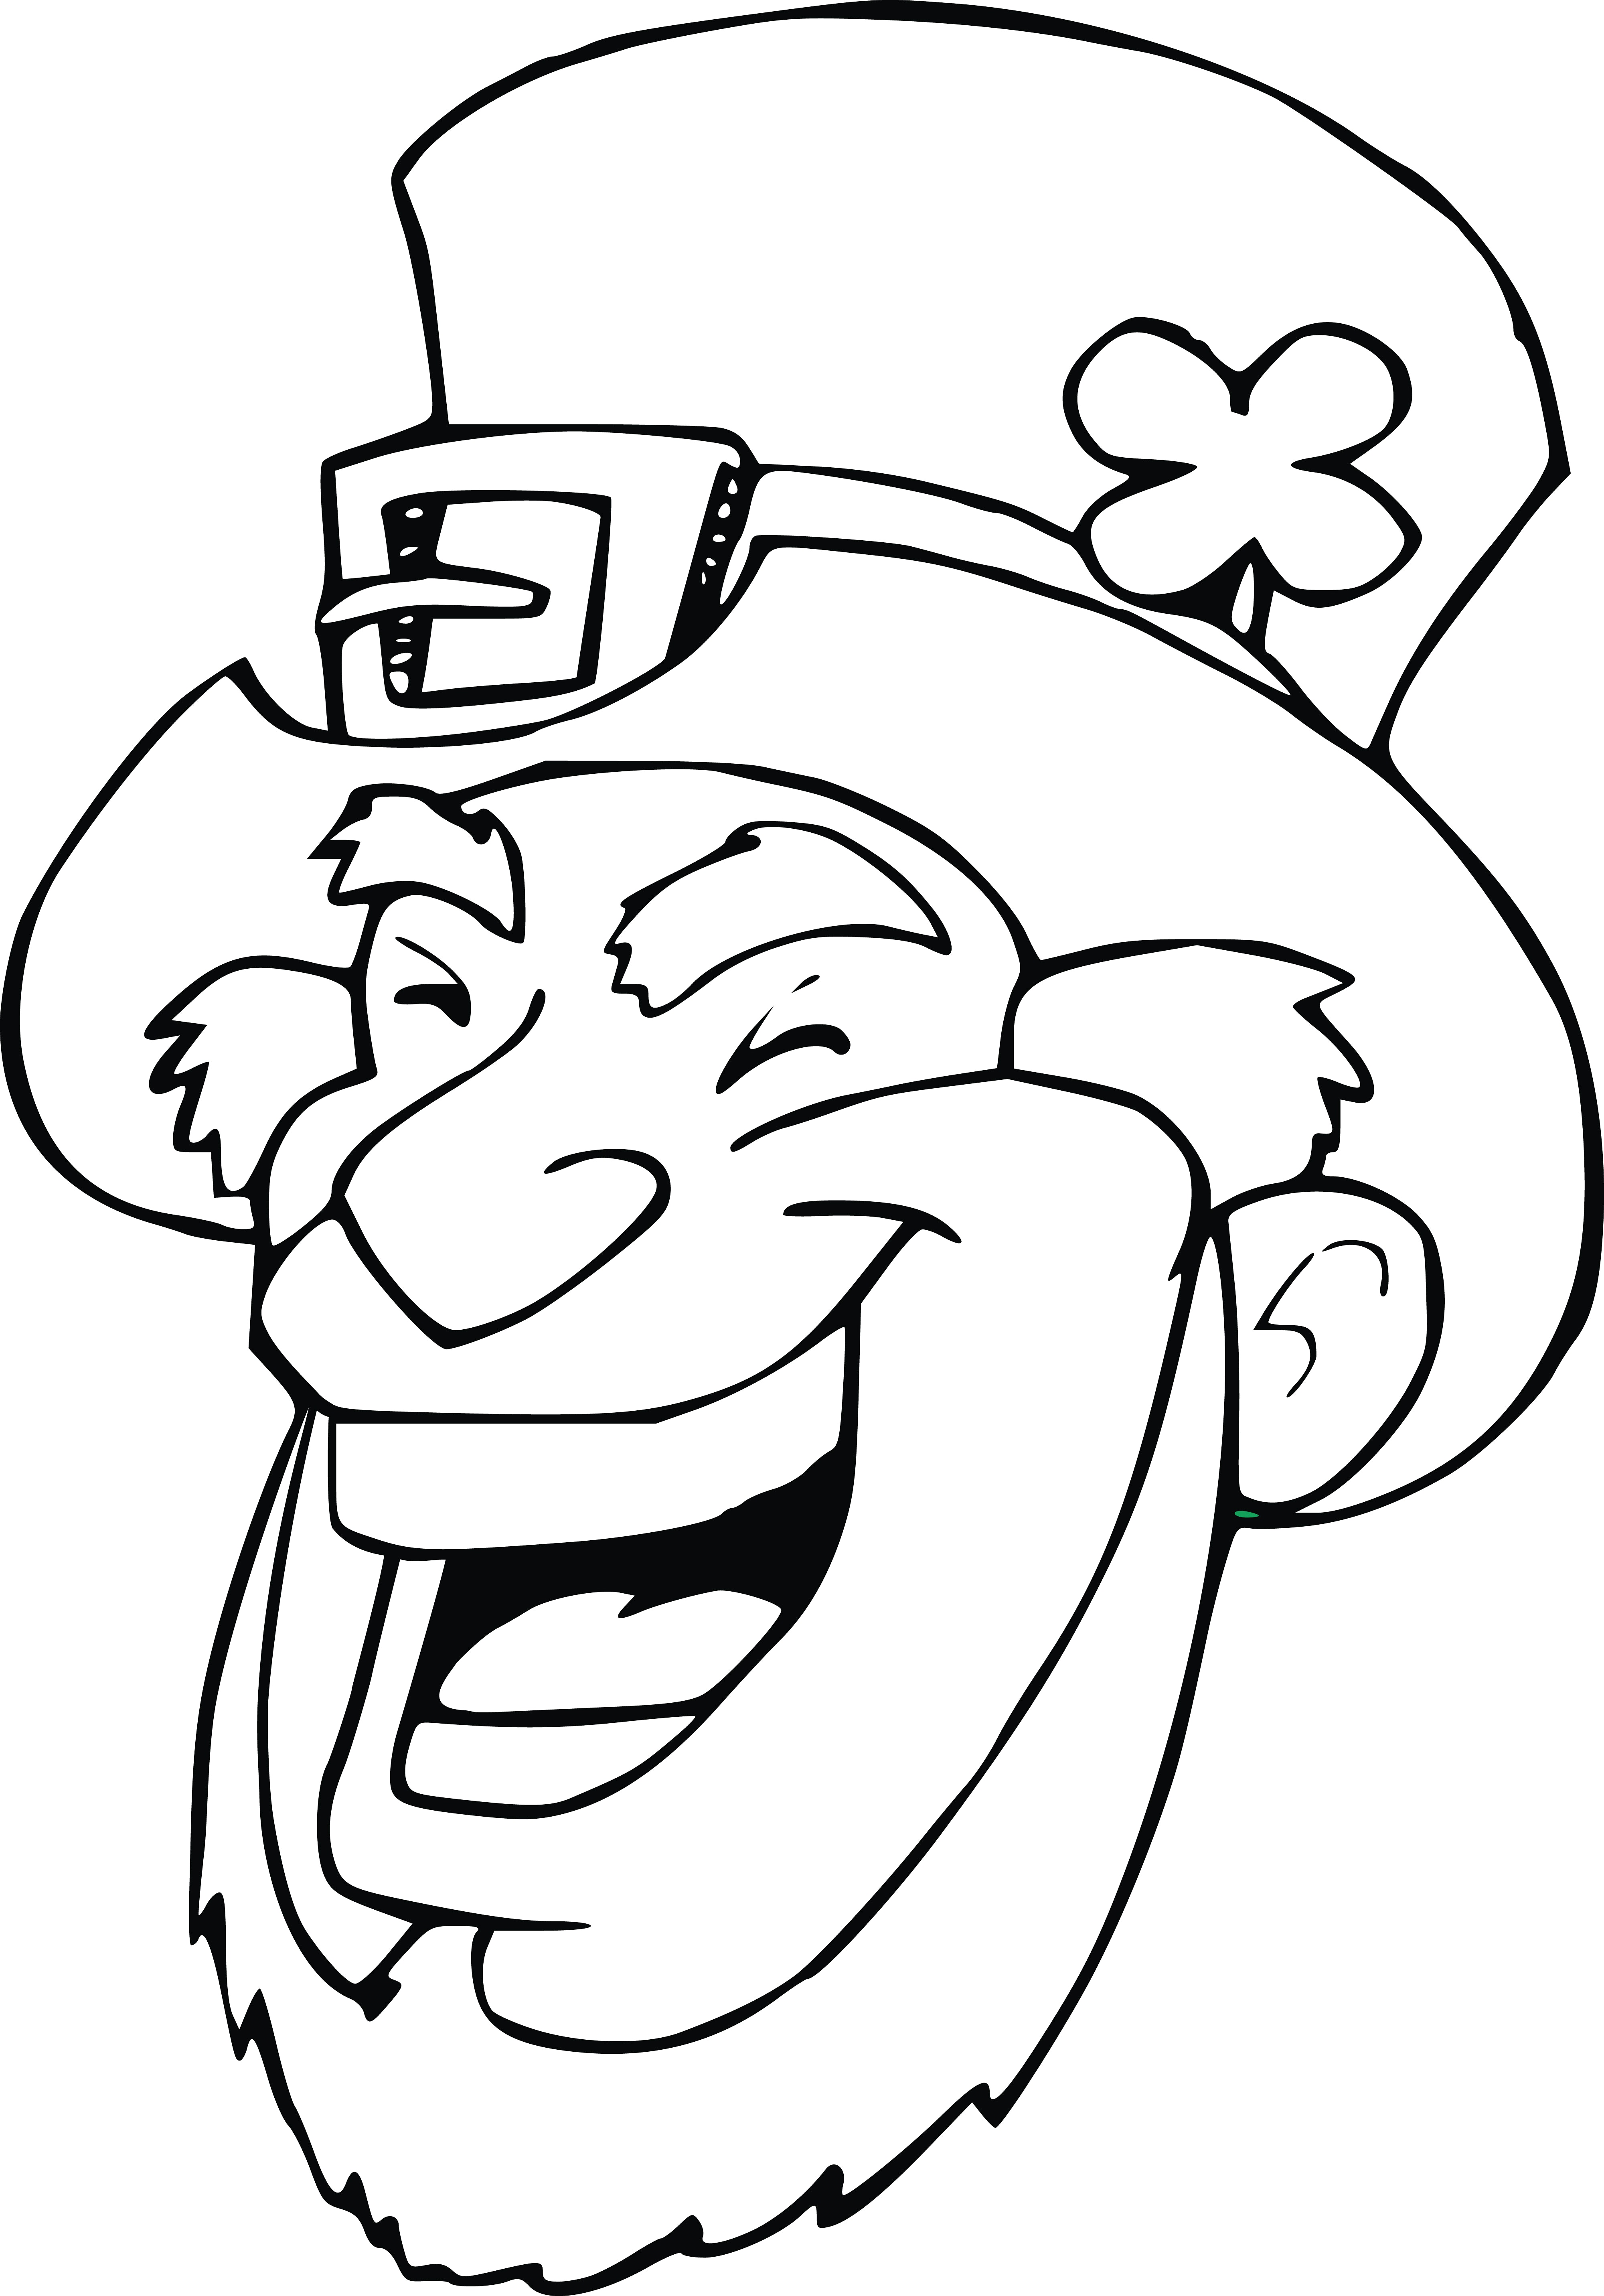 Leprechaun Face Coloring Pages at GetColorings com Free printable